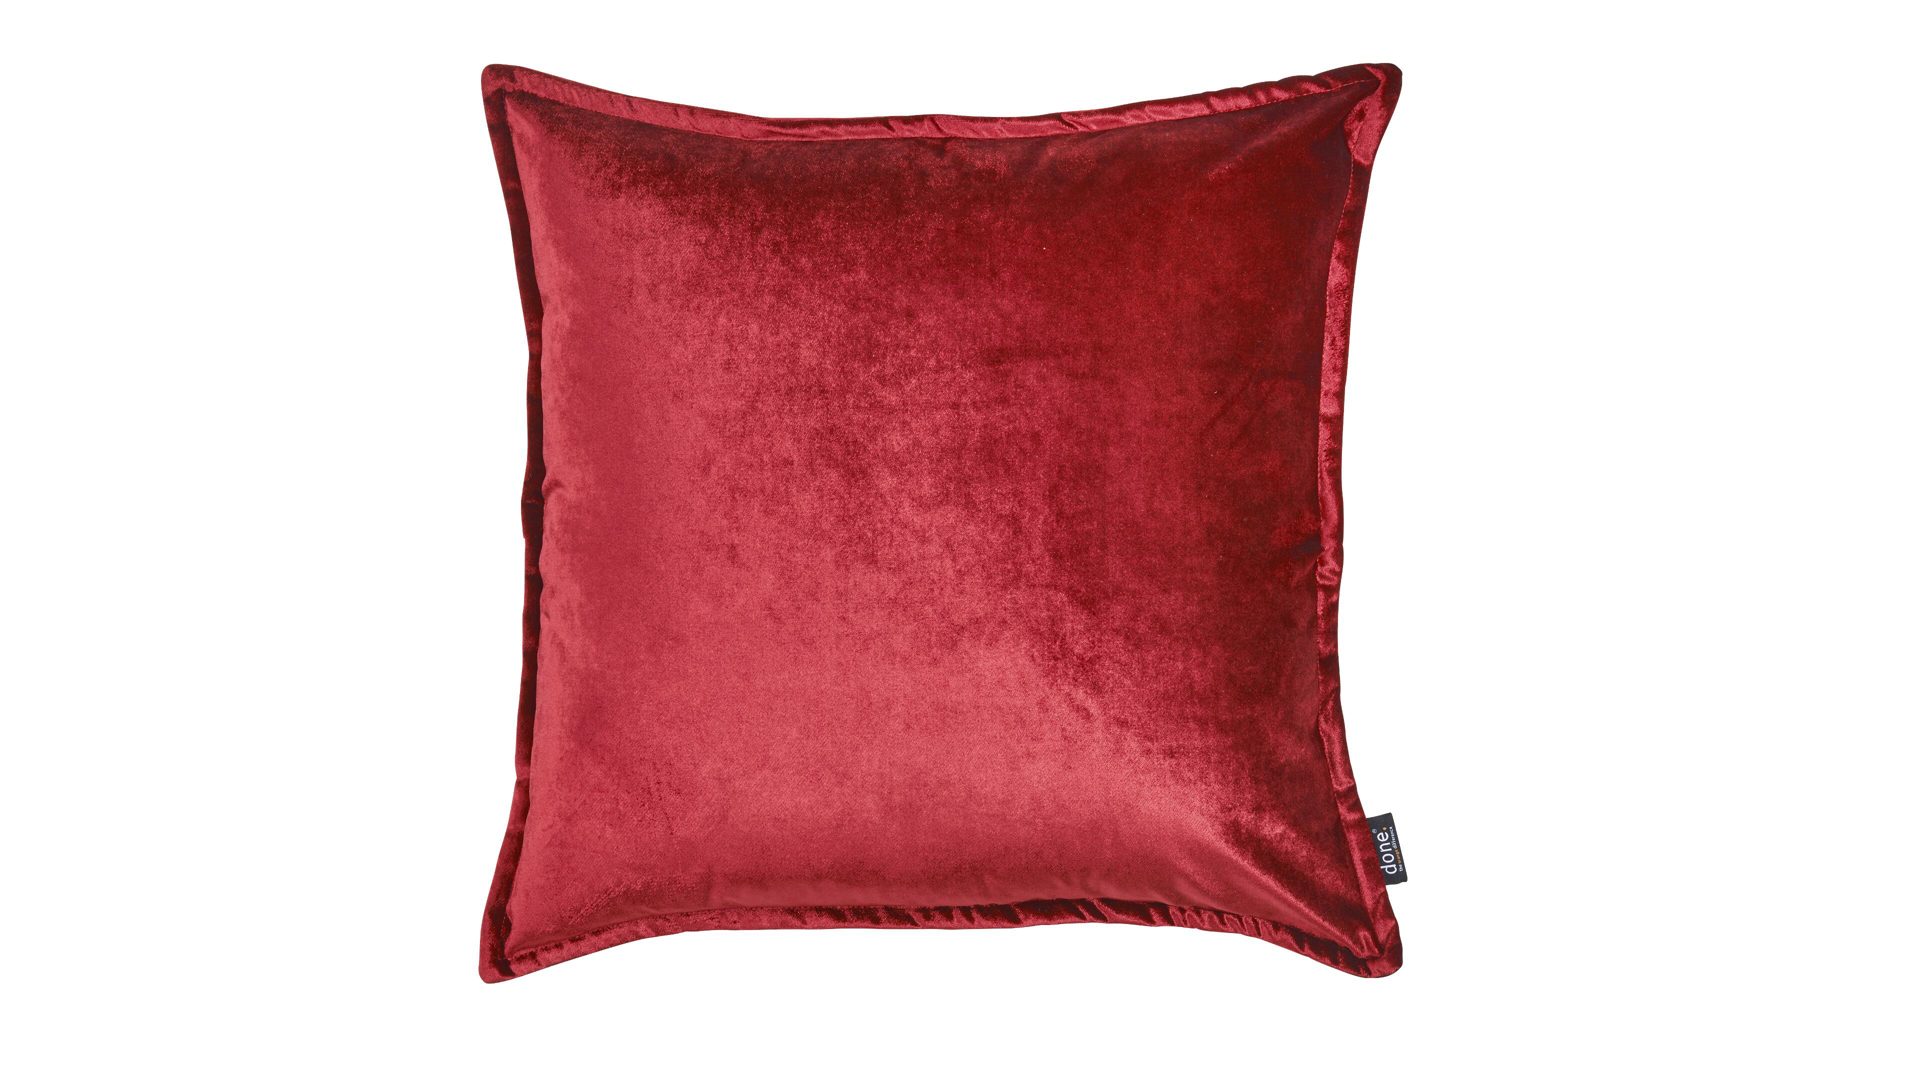 Kissenbezug /-hülle Done.® be different aus Stoff in Dunkelrot DONE.® Kissenhülle Cushion Glam roter Samt – ca. 65 x 65 cm